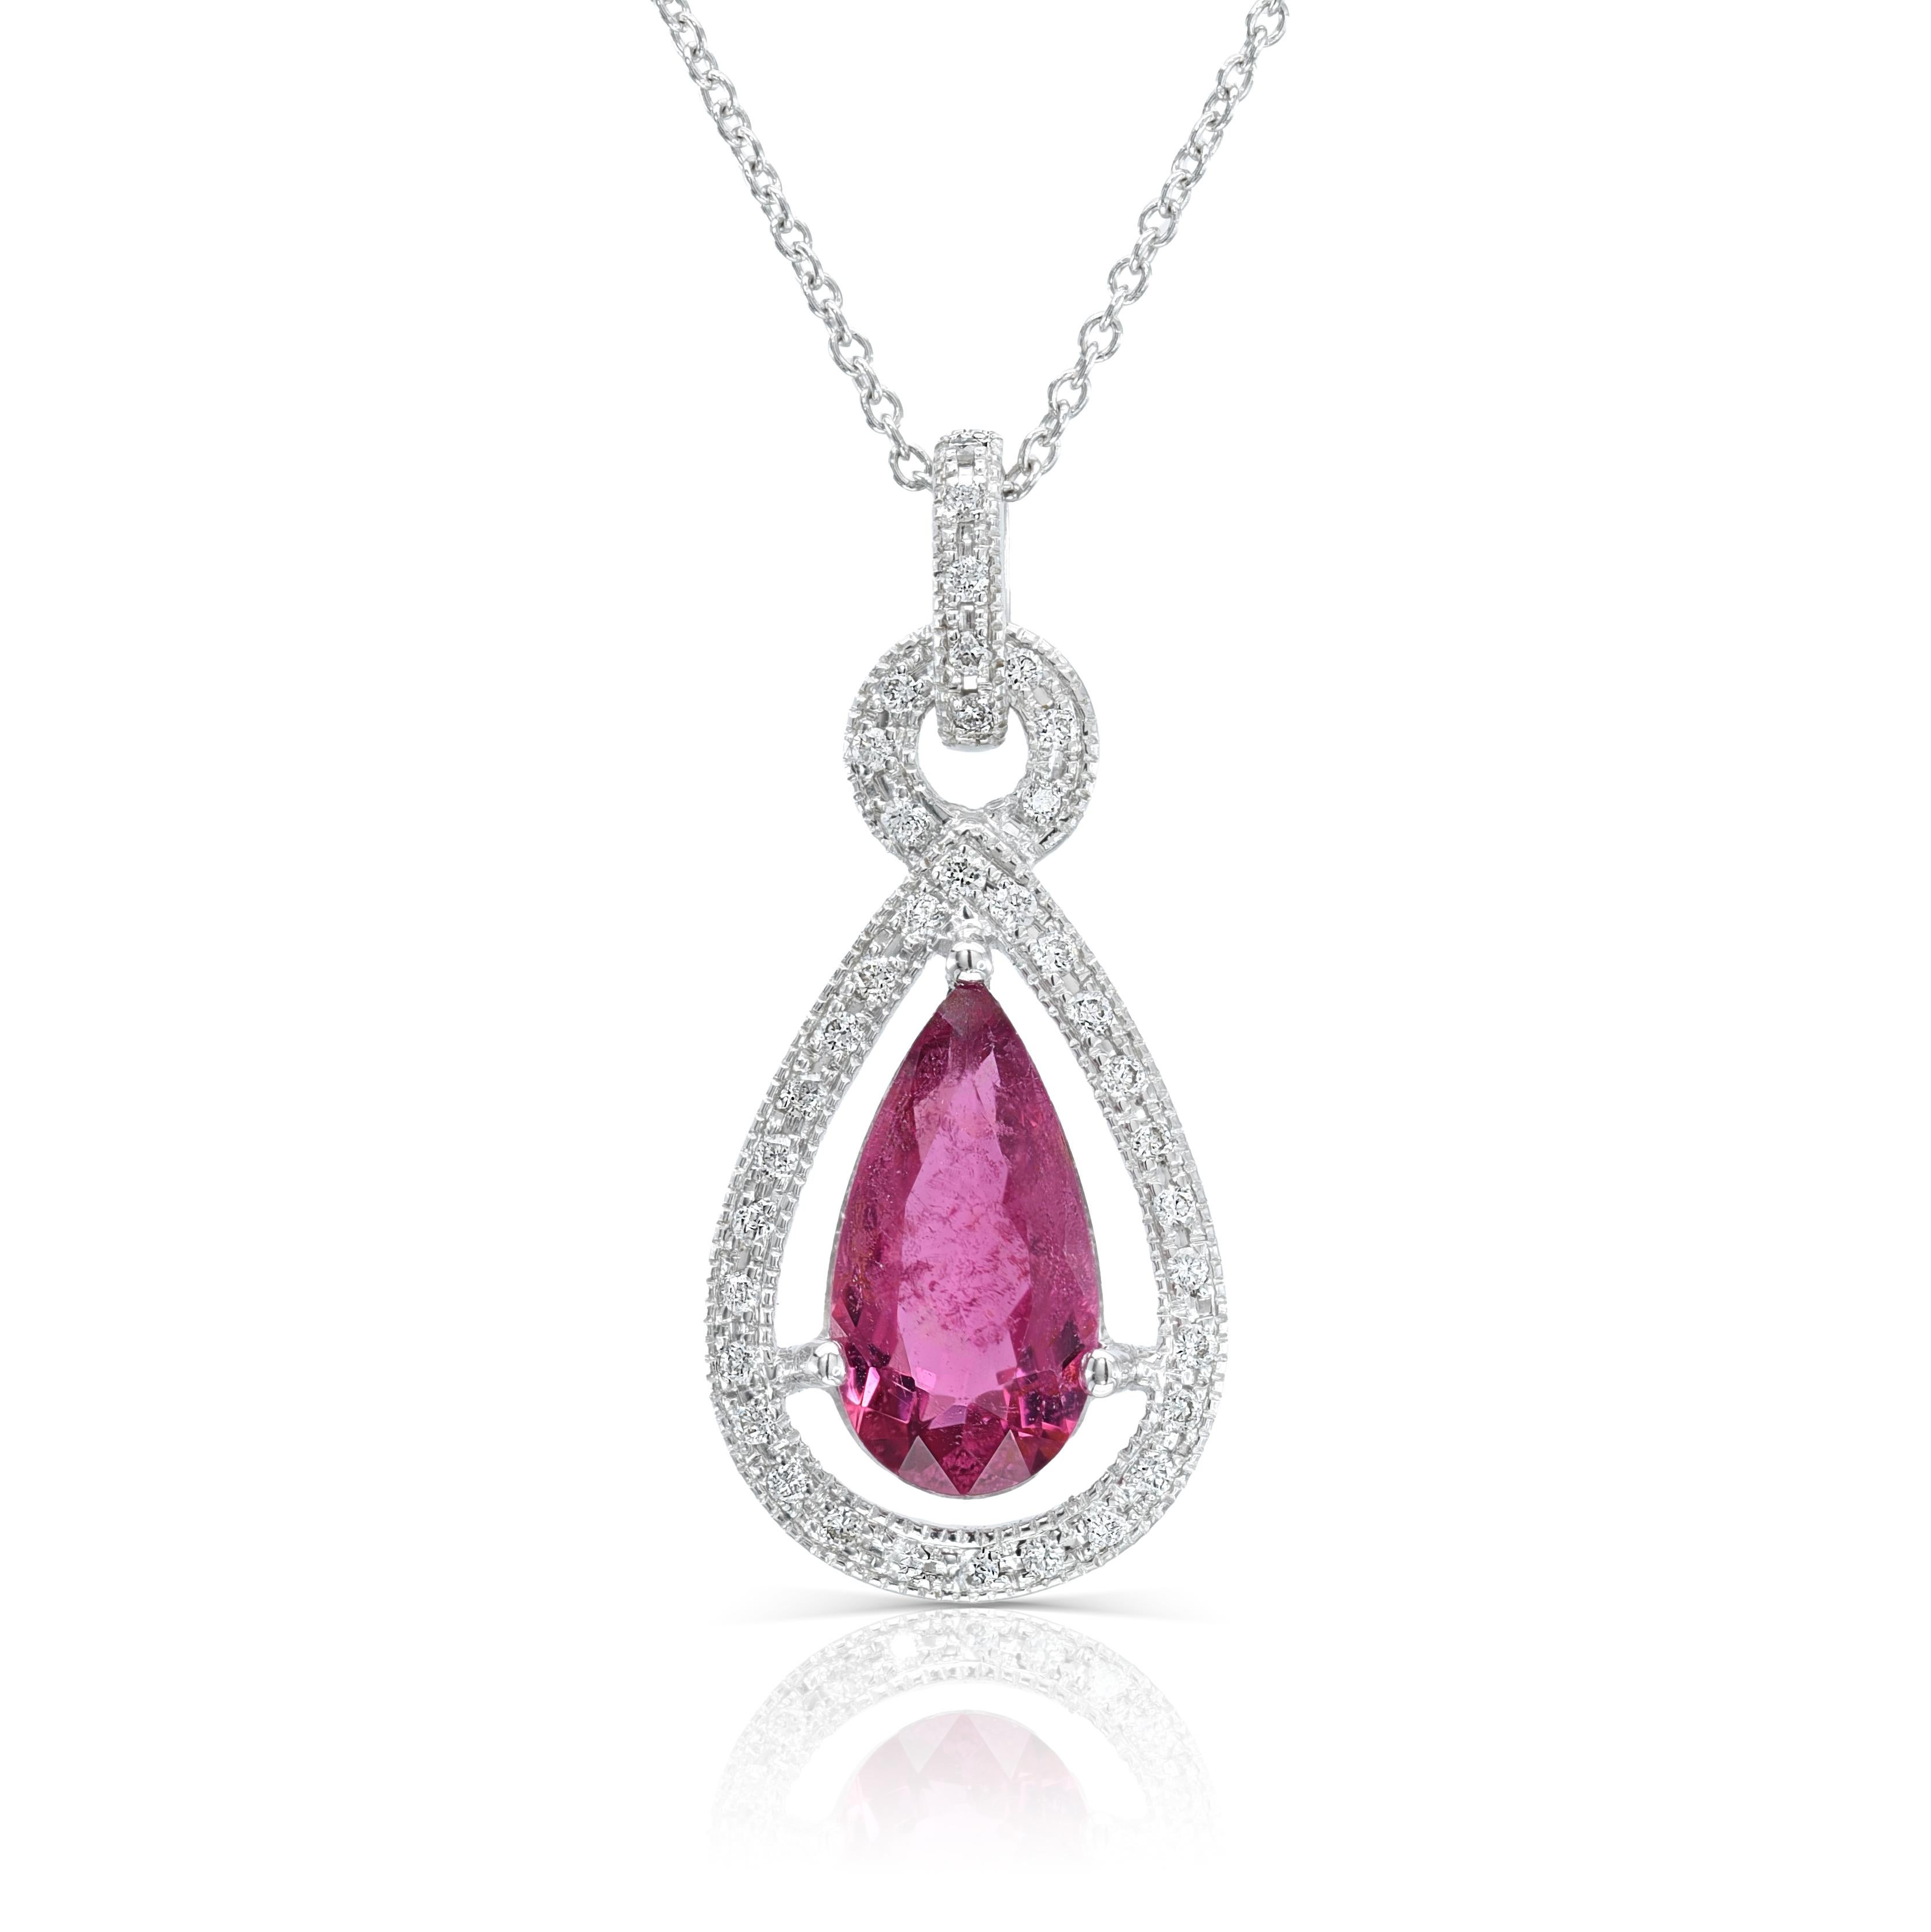 0.96 Carats Rubellite Diamonds set in 14K White Gold Pendant In New Condition For Sale In Los Angeles, CA